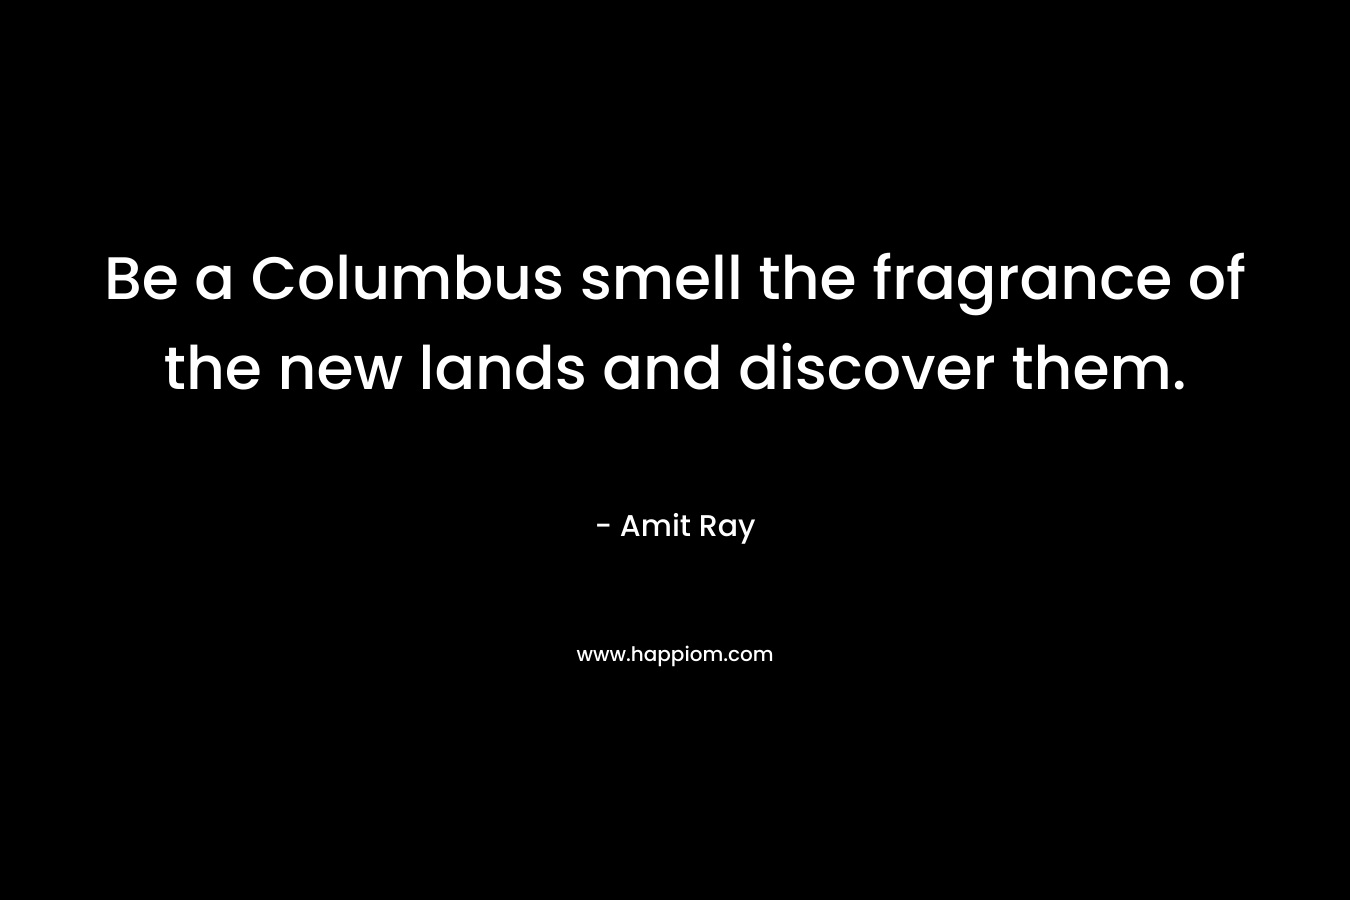 Be a Columbus smell the fragrance of the new lands and discover them.